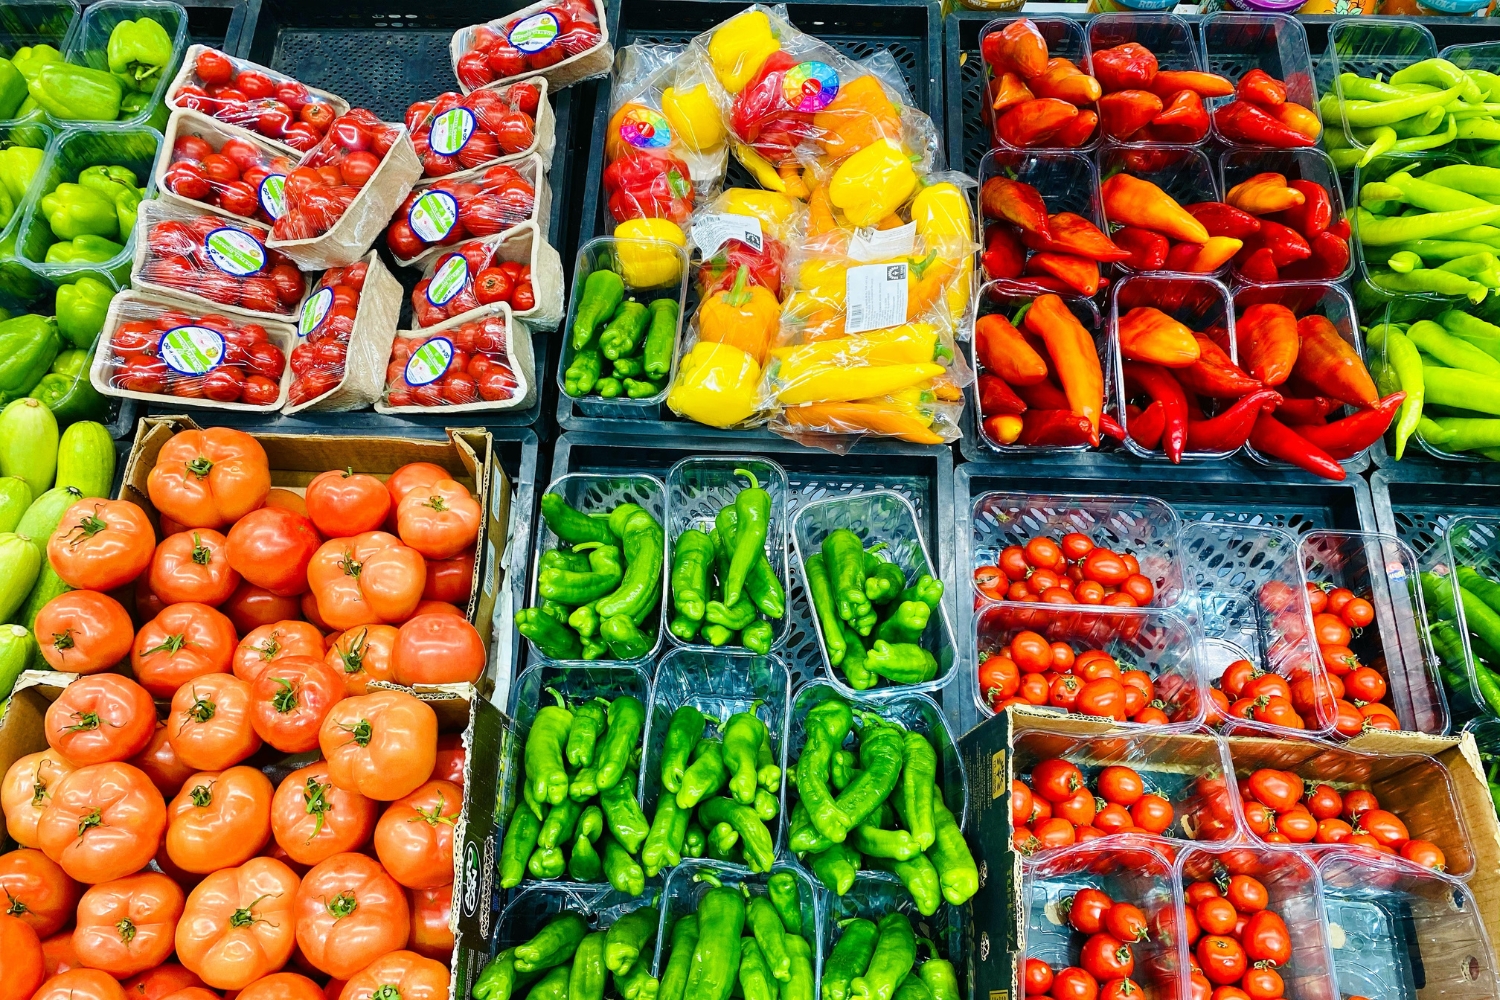 Produce department image - Dilek Altay for Unsplash